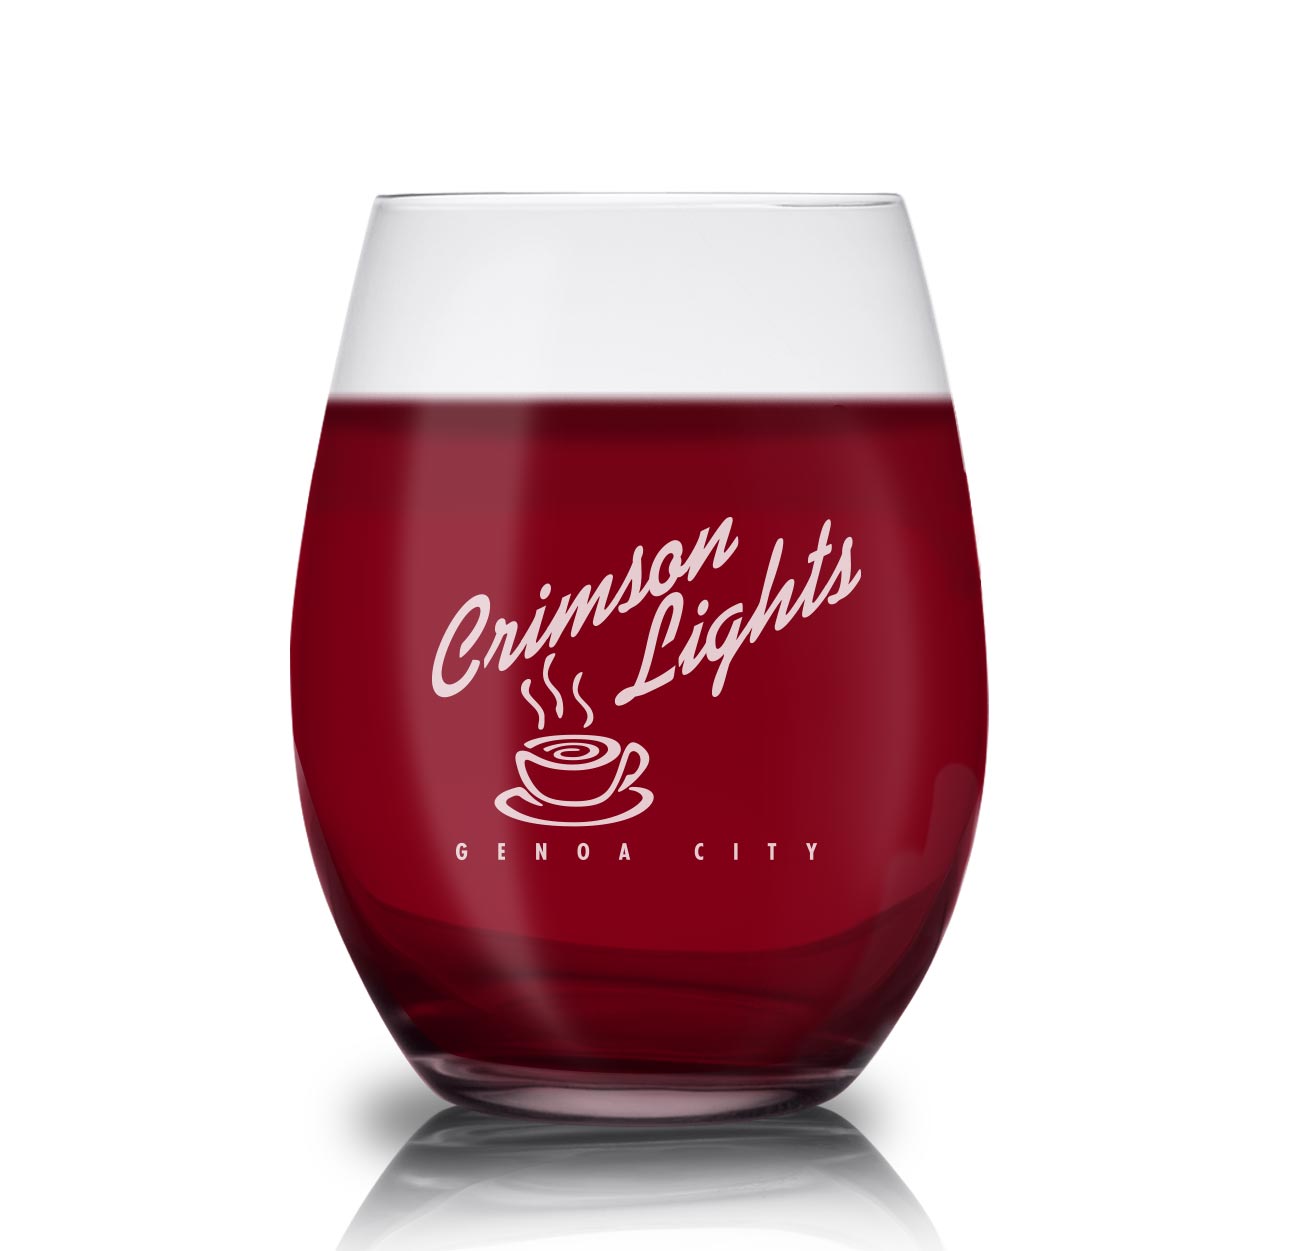 The Young and the Restless Crimson Lights Laser Engraved Stemless Wine Glass